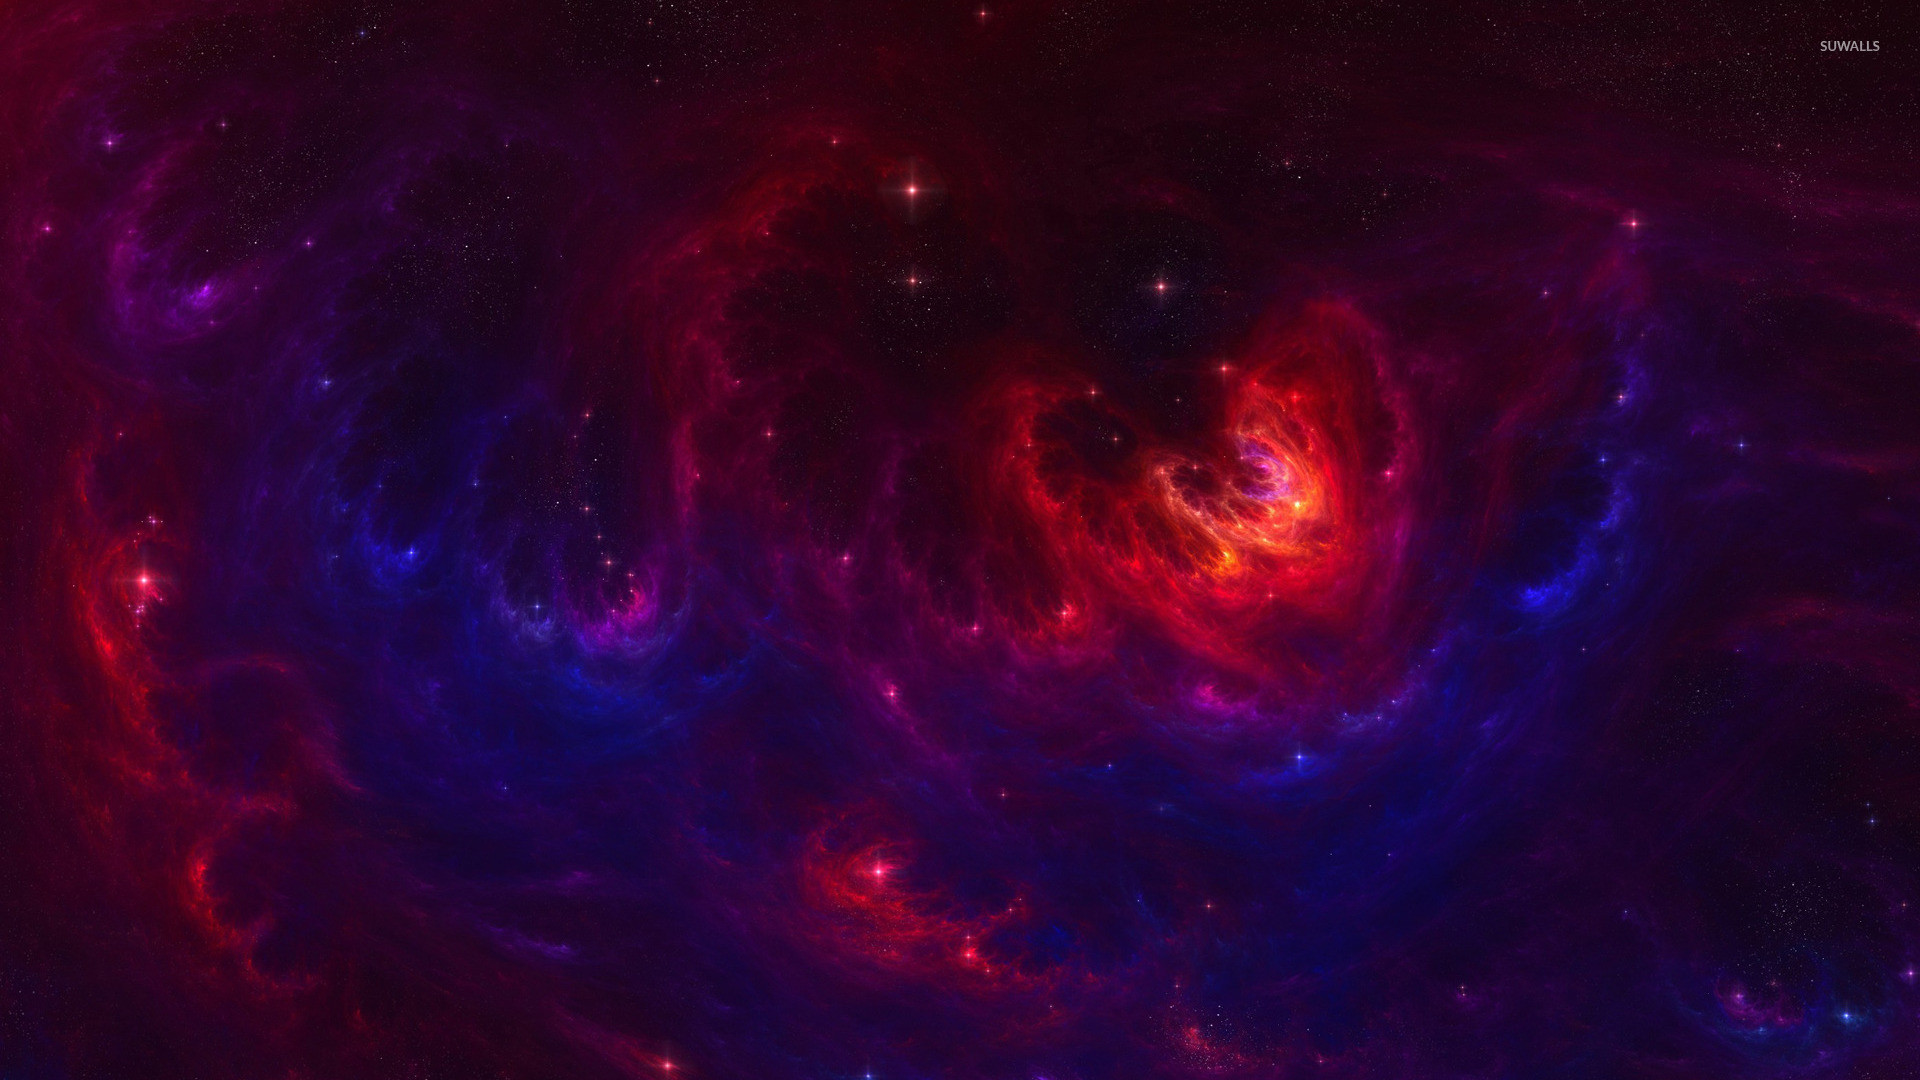 1920x1080 Red and blue nebula wallpaper - Space wallpapers - #17346